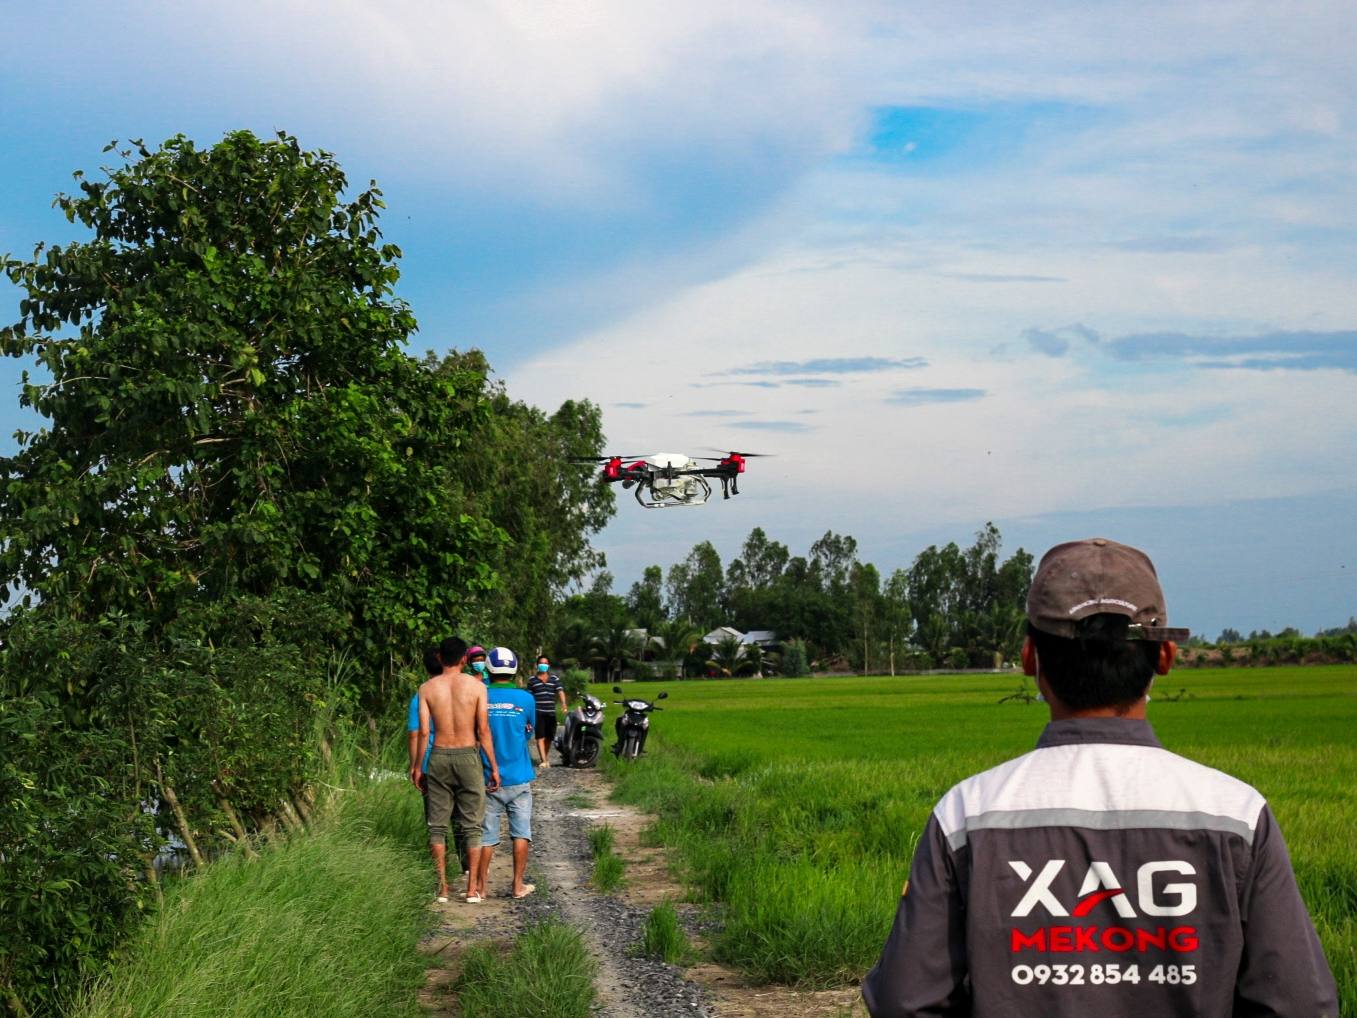 XAG P40 is spraying lime powder to the rice paddy to treat disease